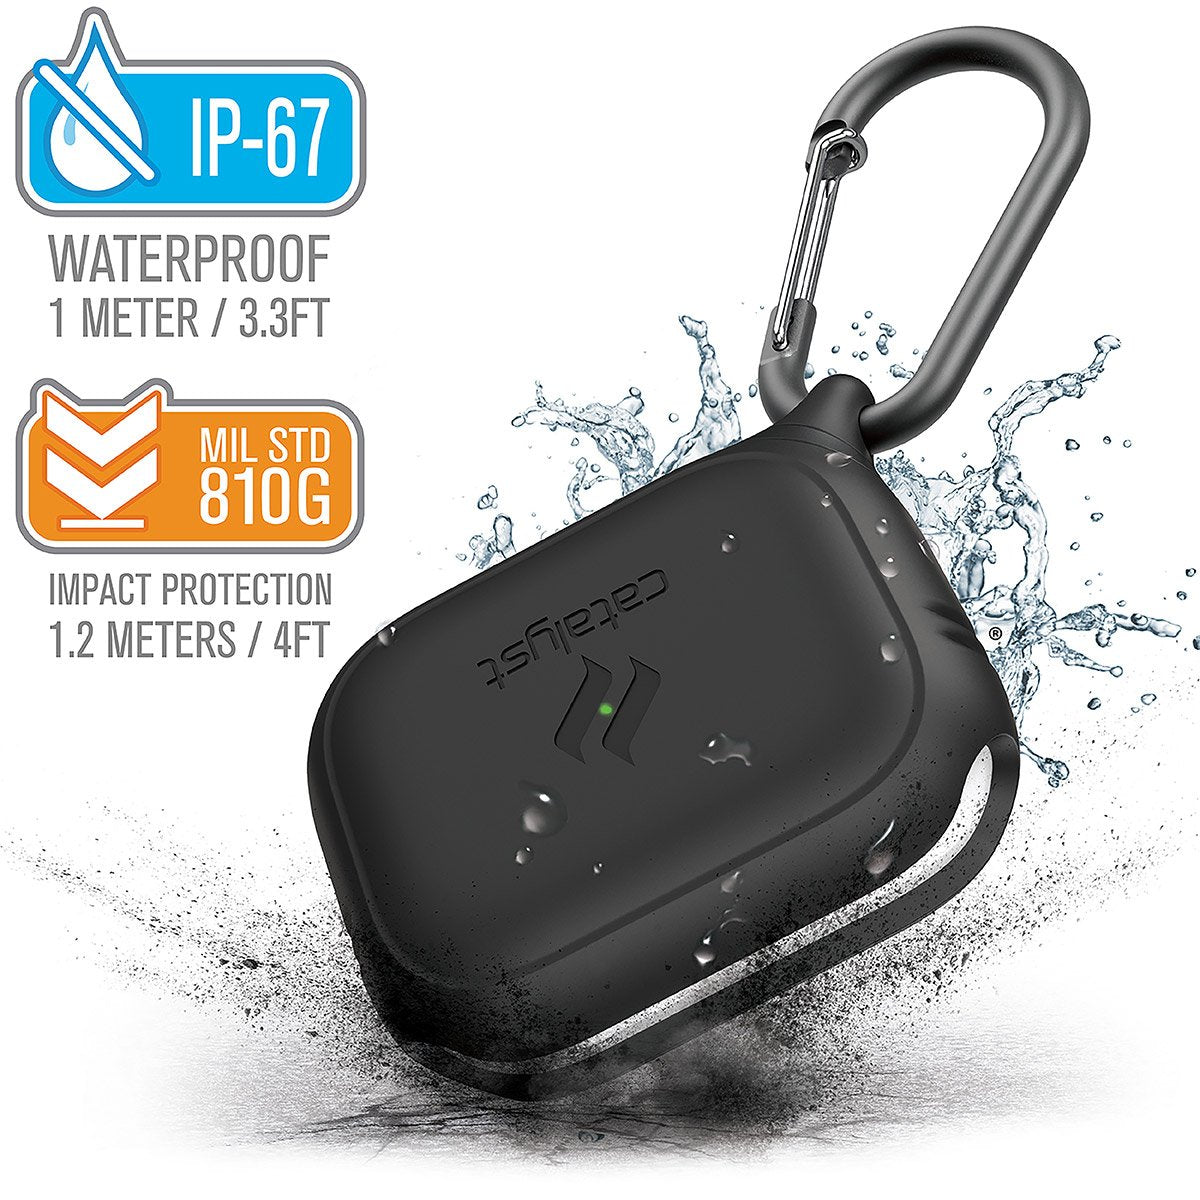 CATAPDPROBLK | catalyst airpods pro gen 2 1 waterproof case carabiner stealth black with cracked floor and splashes of water text reads ip-67 waterproof 1 meter 3.3ft mil std 810g impact protection 1.2 meters 4ft